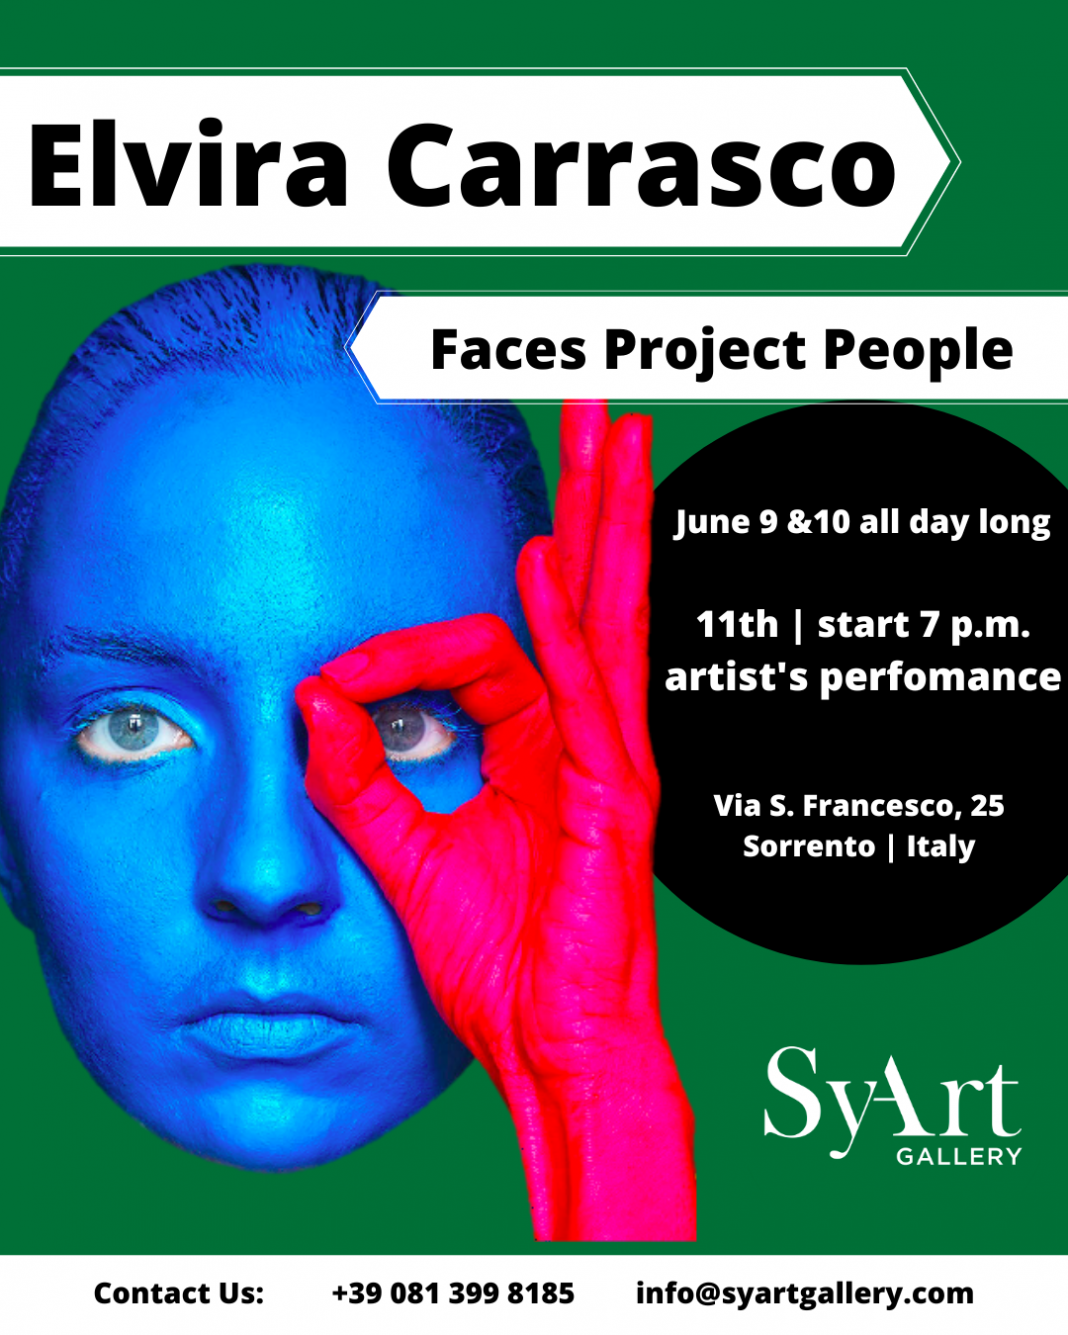 Elvira Carrasco – Faces Project Peoplehttps://www.exibart.com/repository/media/formidable/11/img/01c/Faces-Project-People-1068x1335.png